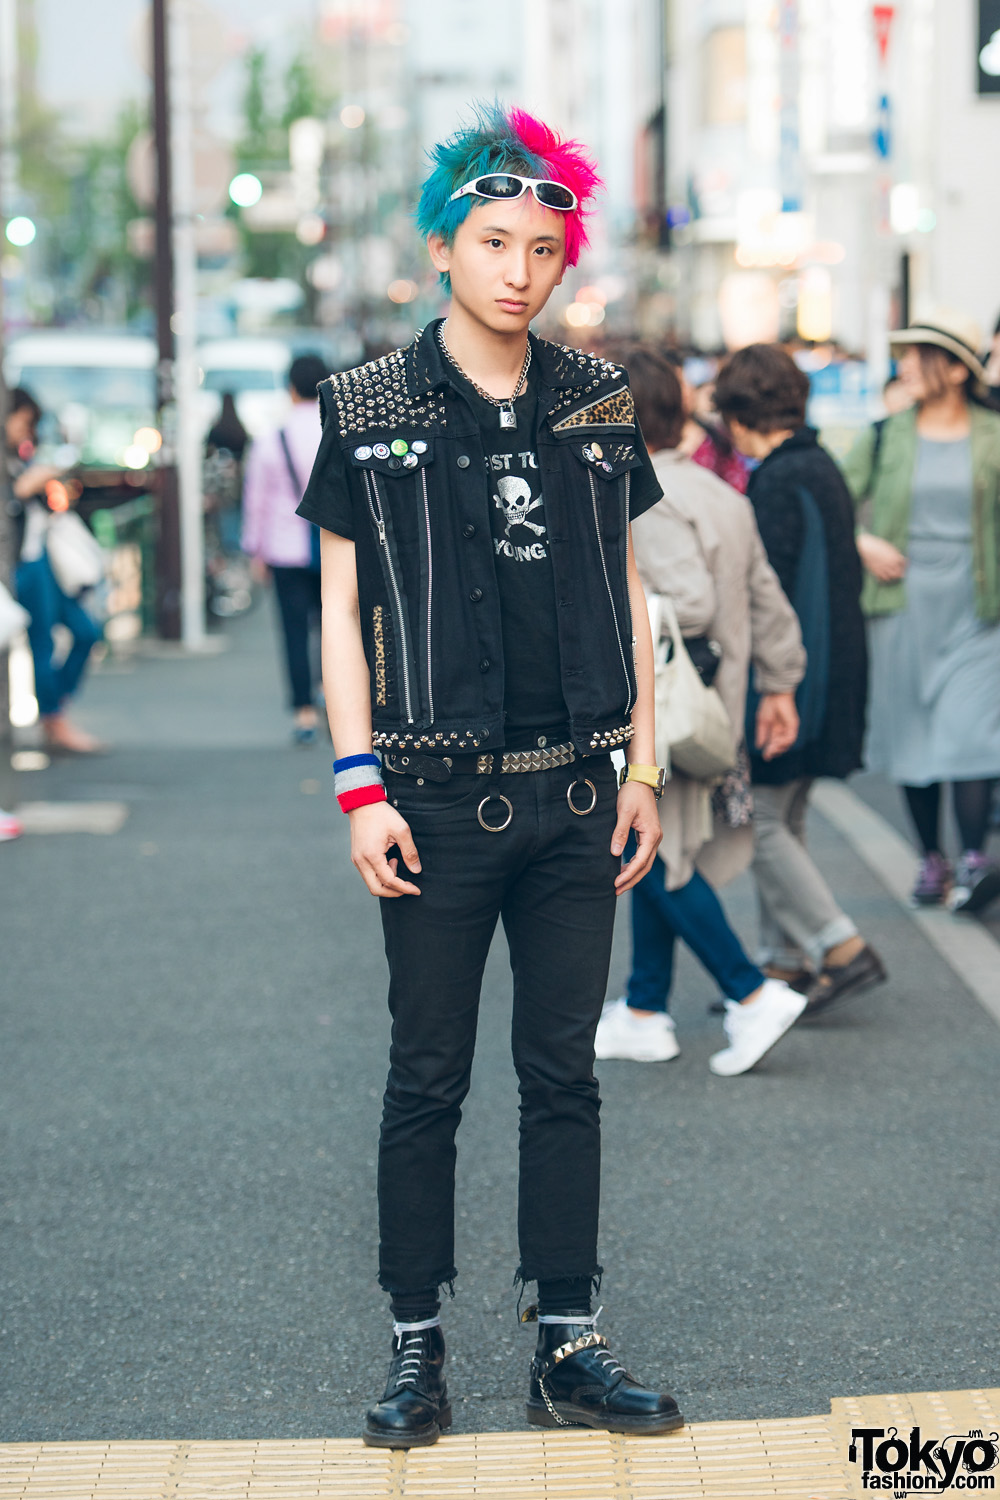 Punk Street Style in Tokyo w/ Studded The Clash Vest & Dr. Martens ...